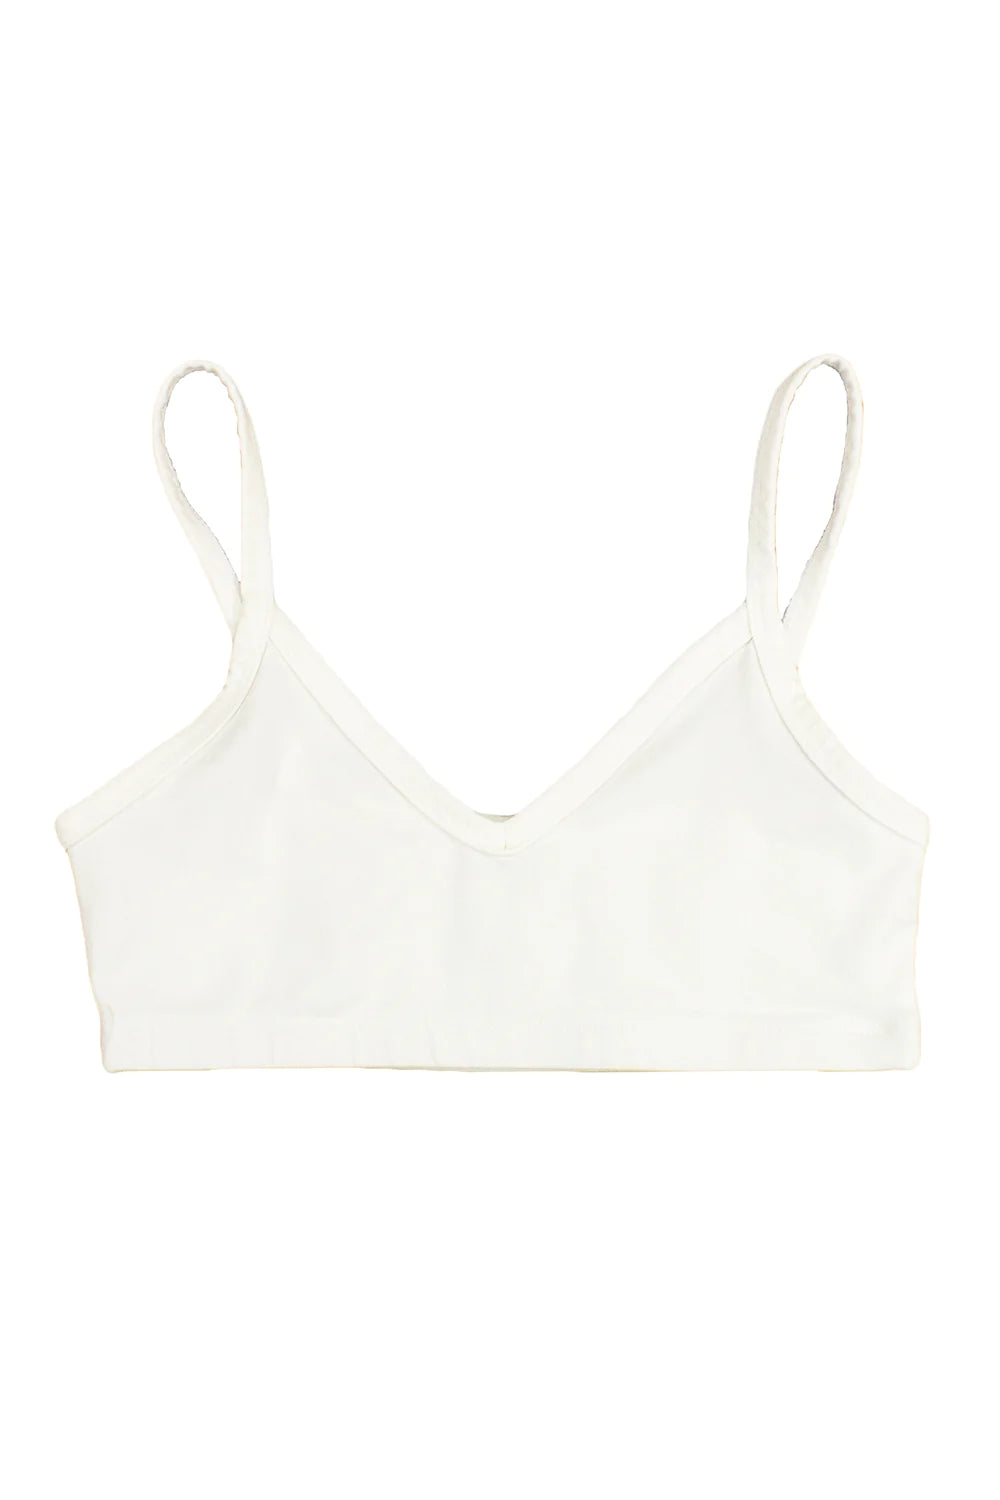 Daily Drills Terry Cloth Bralette Size S in Lemon Zest